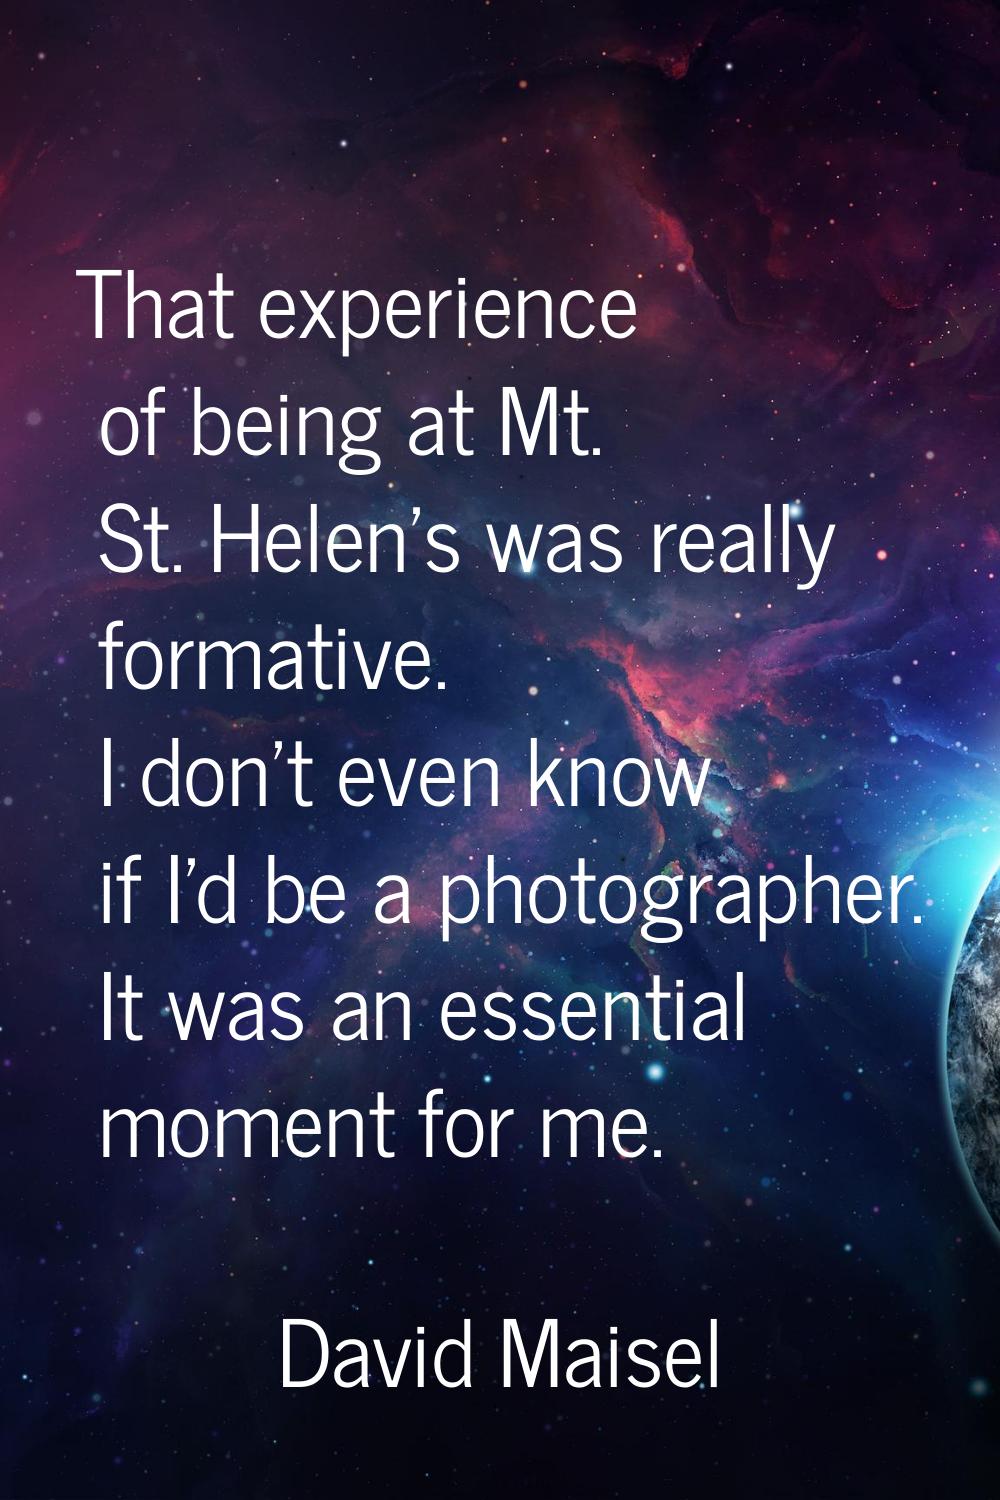 That experience of being at Mt. St. Helen's was really formative. I don't even know if I'd be a pho